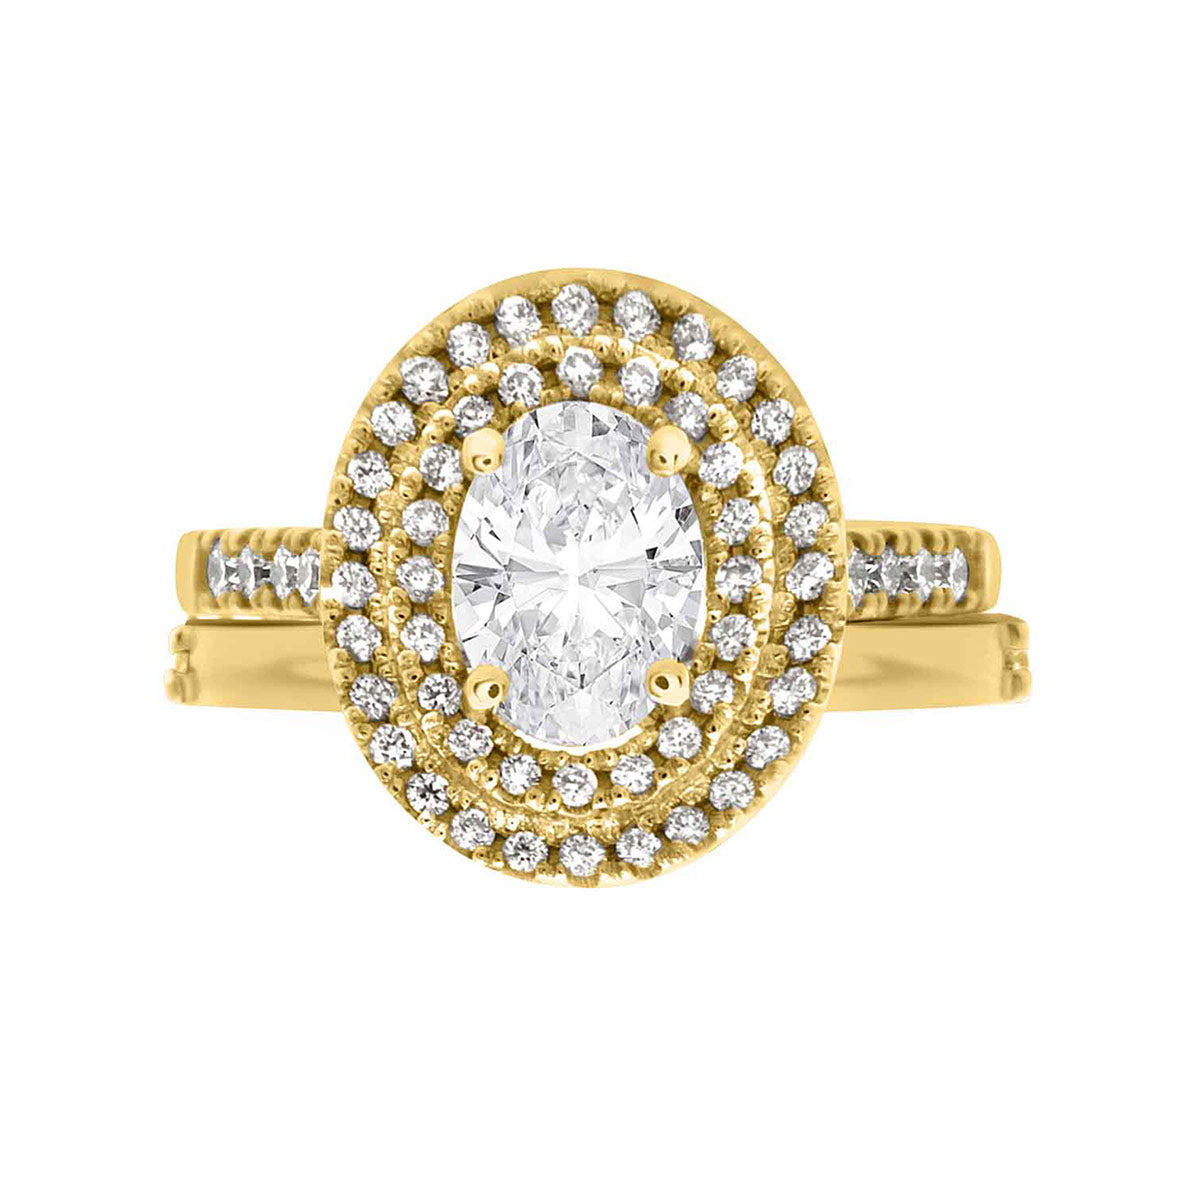 Double Halo Oval Engagement Ring In yellow gold with a matching yellow gold wedding ring